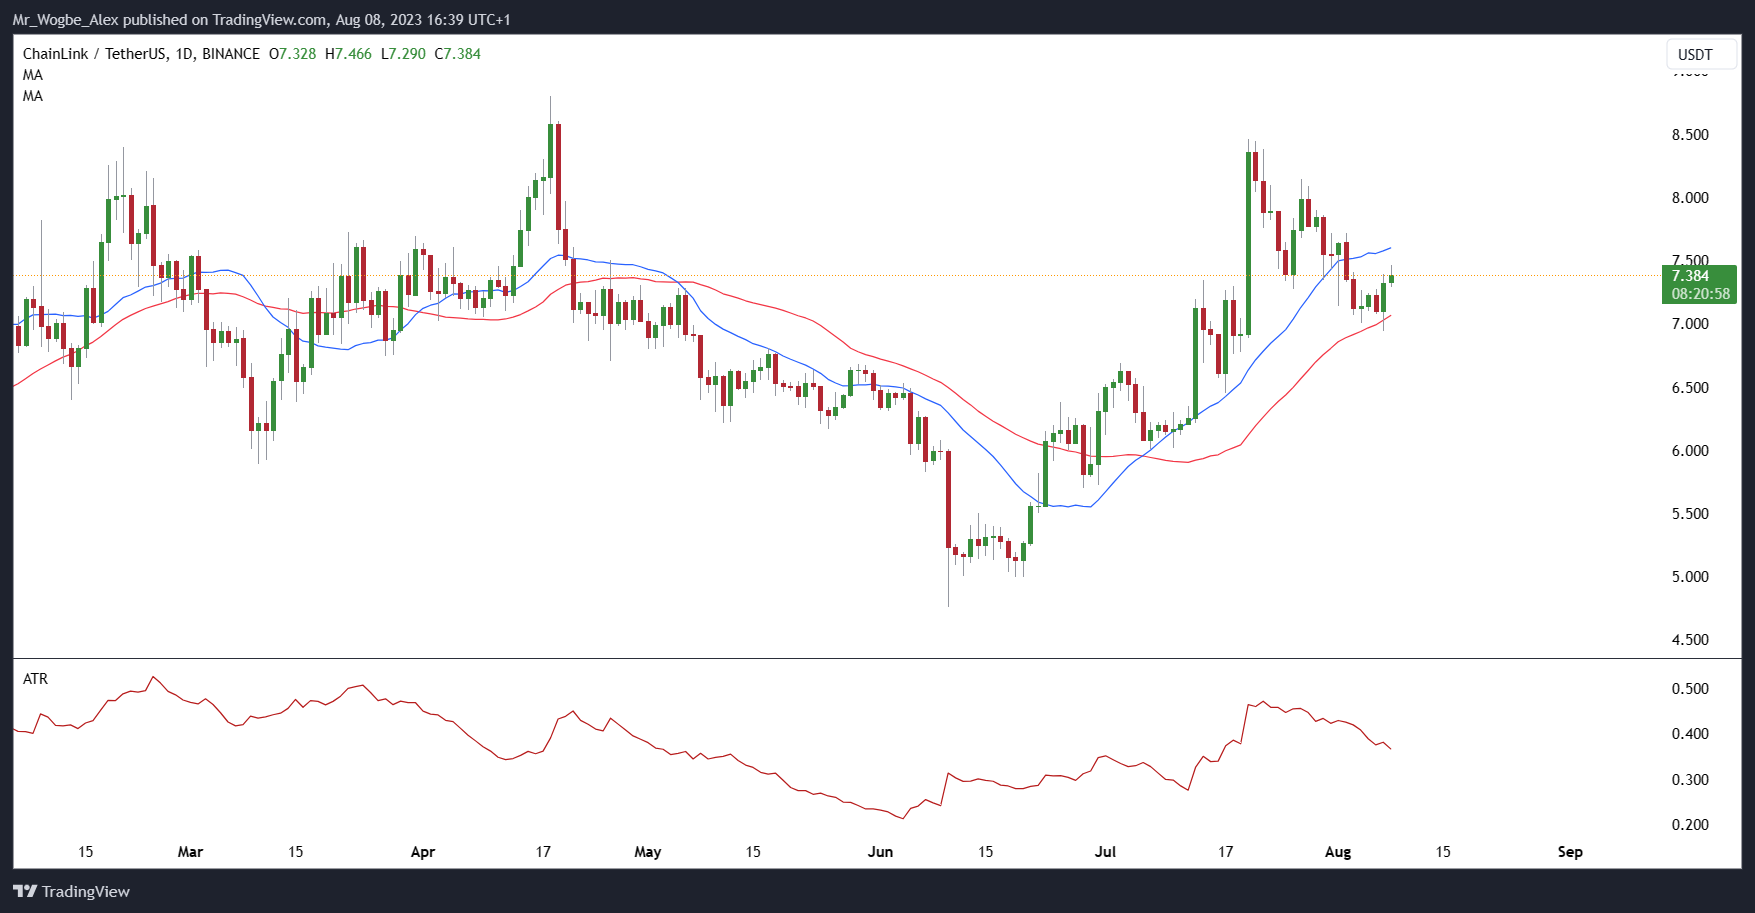 LINK/USD Daily Chart